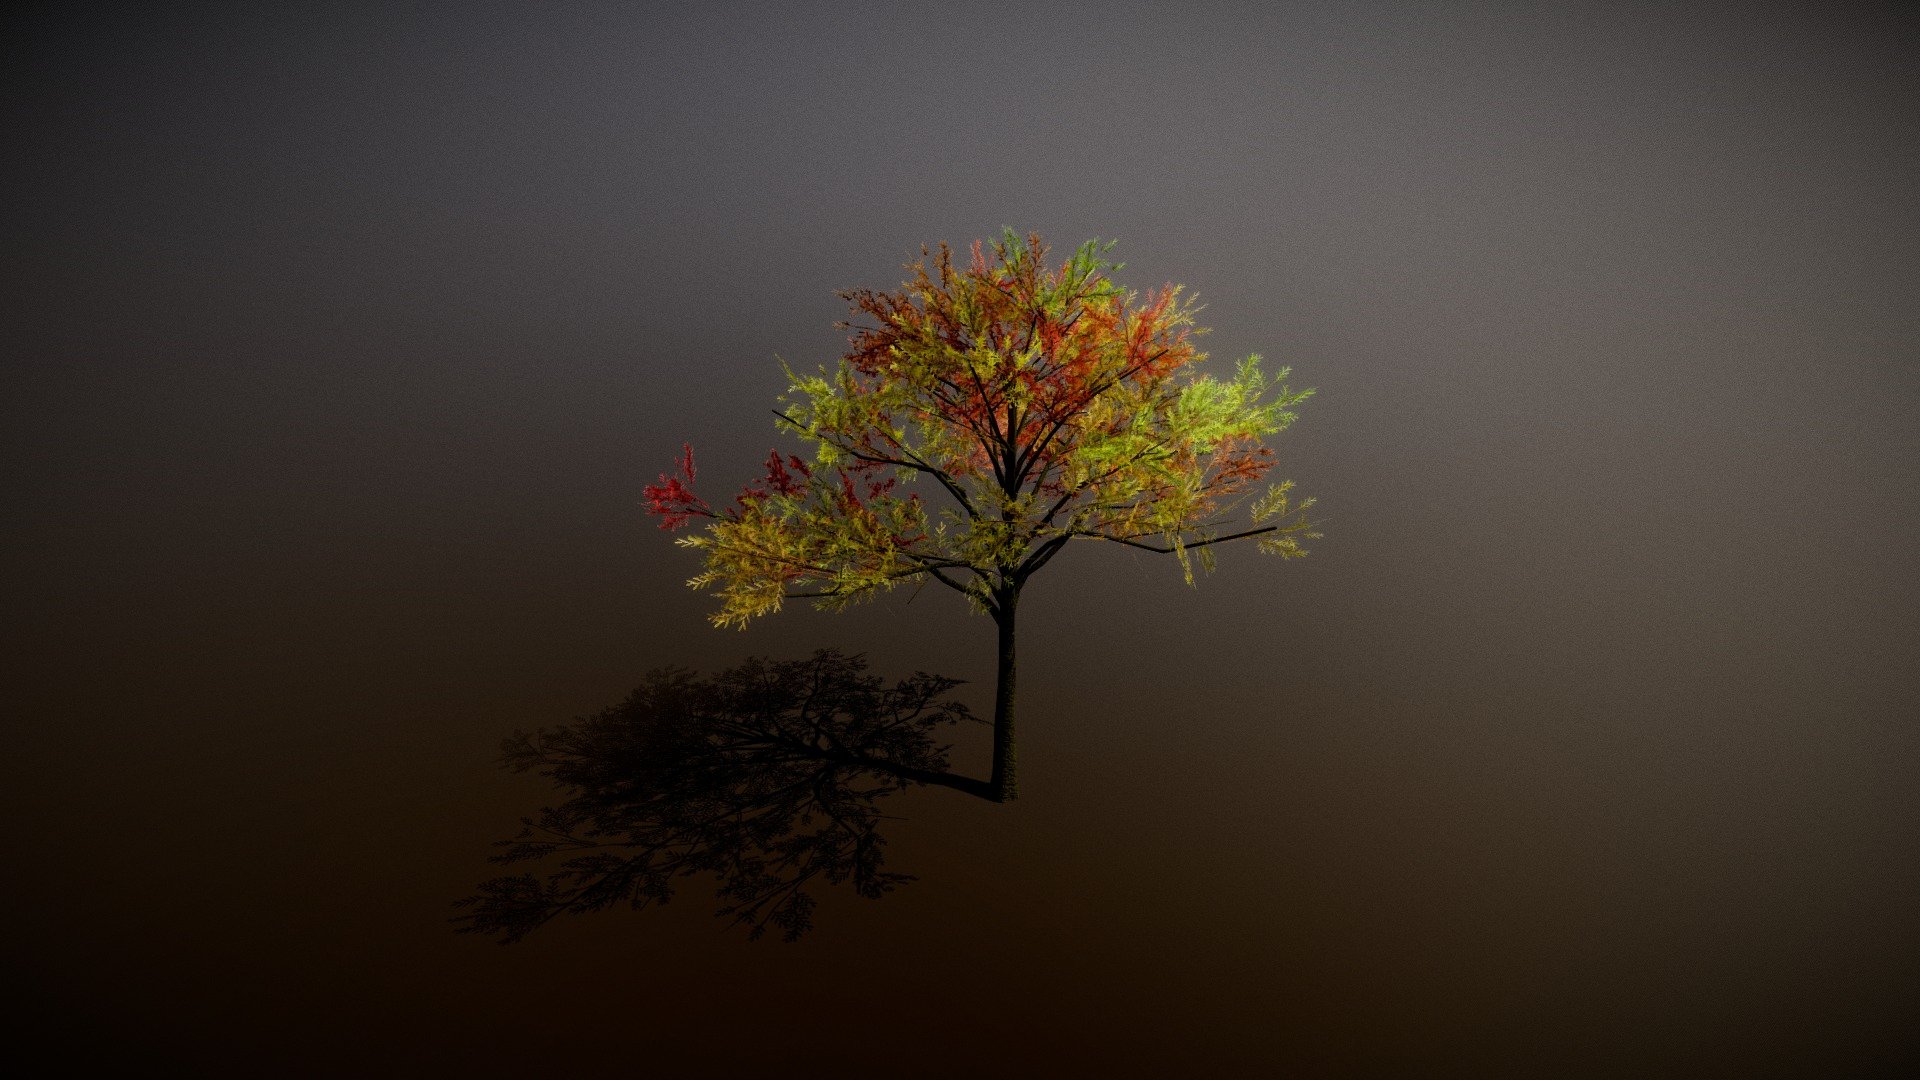 http://www.evolved-software.com/treeit/treeit

Tree It is an easy to use and powerfull real time 3d tree generator for the simple creation of your very own 3d tree models for your dark basic pro and dark GDK apps and games. All Tree It model exports are 100% free to use with any engine and project, whether it’s darkbasic or unreal 4.

Features Very easy to create high quality 3D trees. Create any tree, not limited to just one tree type. Edit joints as well as break joints. Render to image for leaf creation. Adjustable LOD slider. Exports to .dbo .obj *.x .
Free 3d model